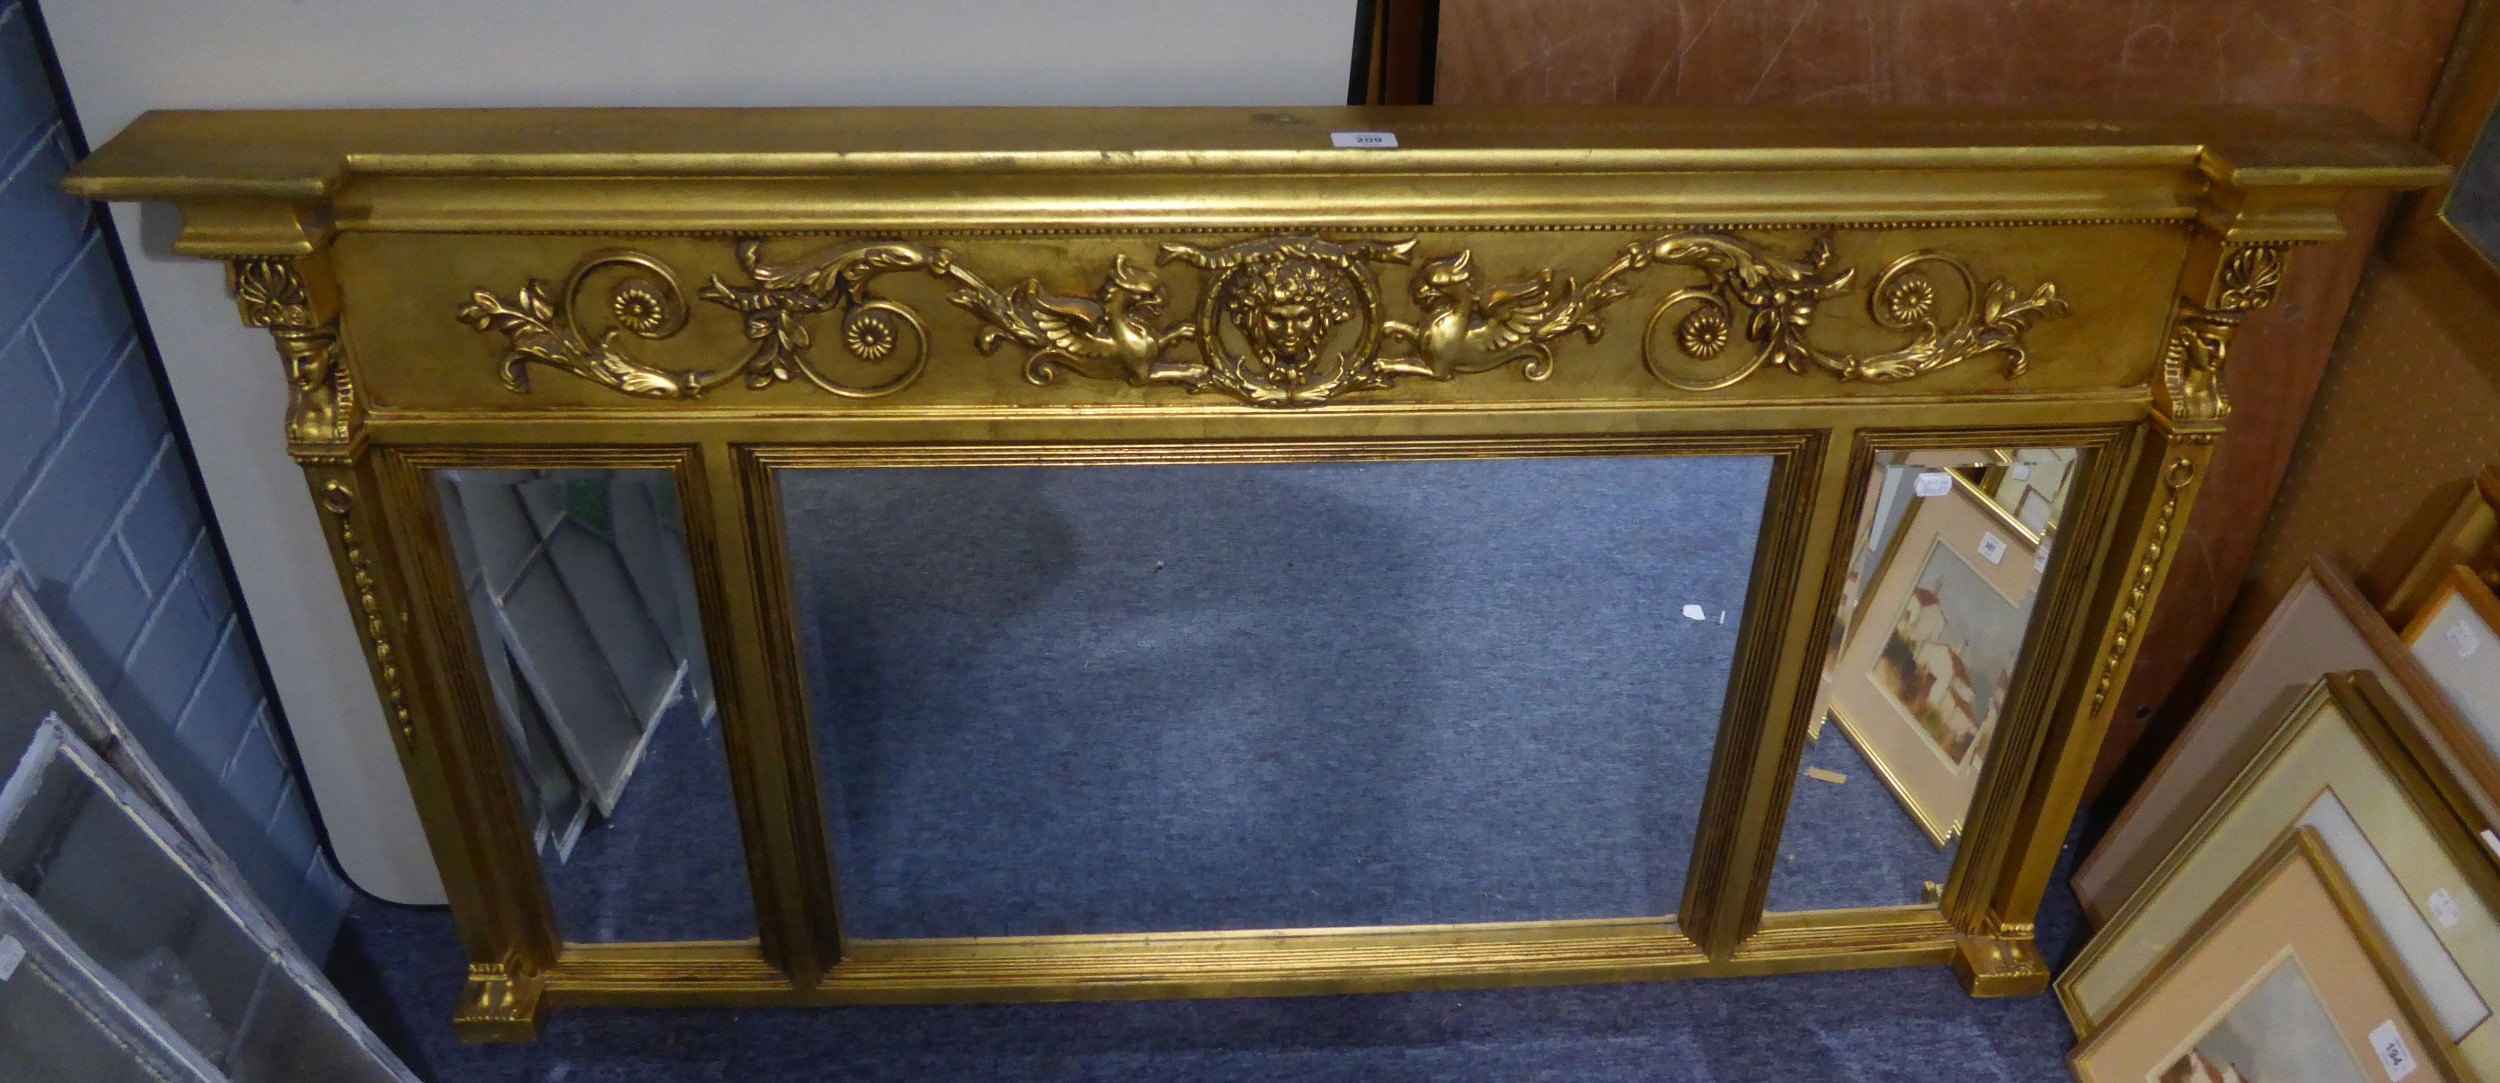 A LARGE RECTANGULAR THREE SECTION GILT FRAMED OVER MANTEL MIRROR, WITH EMBOSSED DRAGON DECORATION